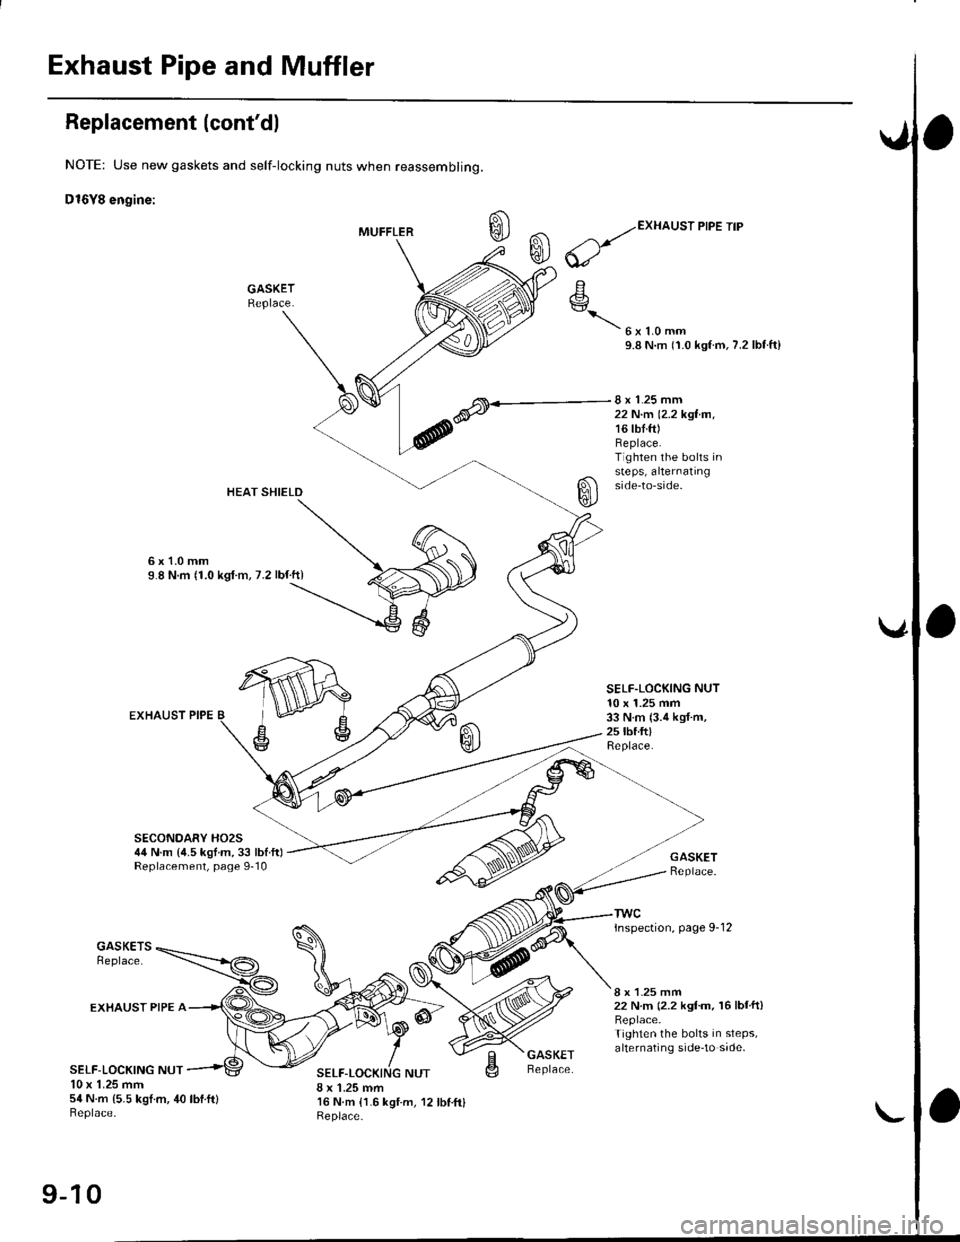 HONDA CIVIC 1996 6.G Workshop Manual Exhaust Pipe and Muffler
Replacement {contdl
NOTE: Use new gaskets and self-locking nuts when reassembling.
D16Y8 engine:
MUFFLER
HEAT SHIELD
6x1.0mm9.8 N.m (1.0 kgl m, 7.2 lbf.ft)
EXHAUST PIPE
SECON